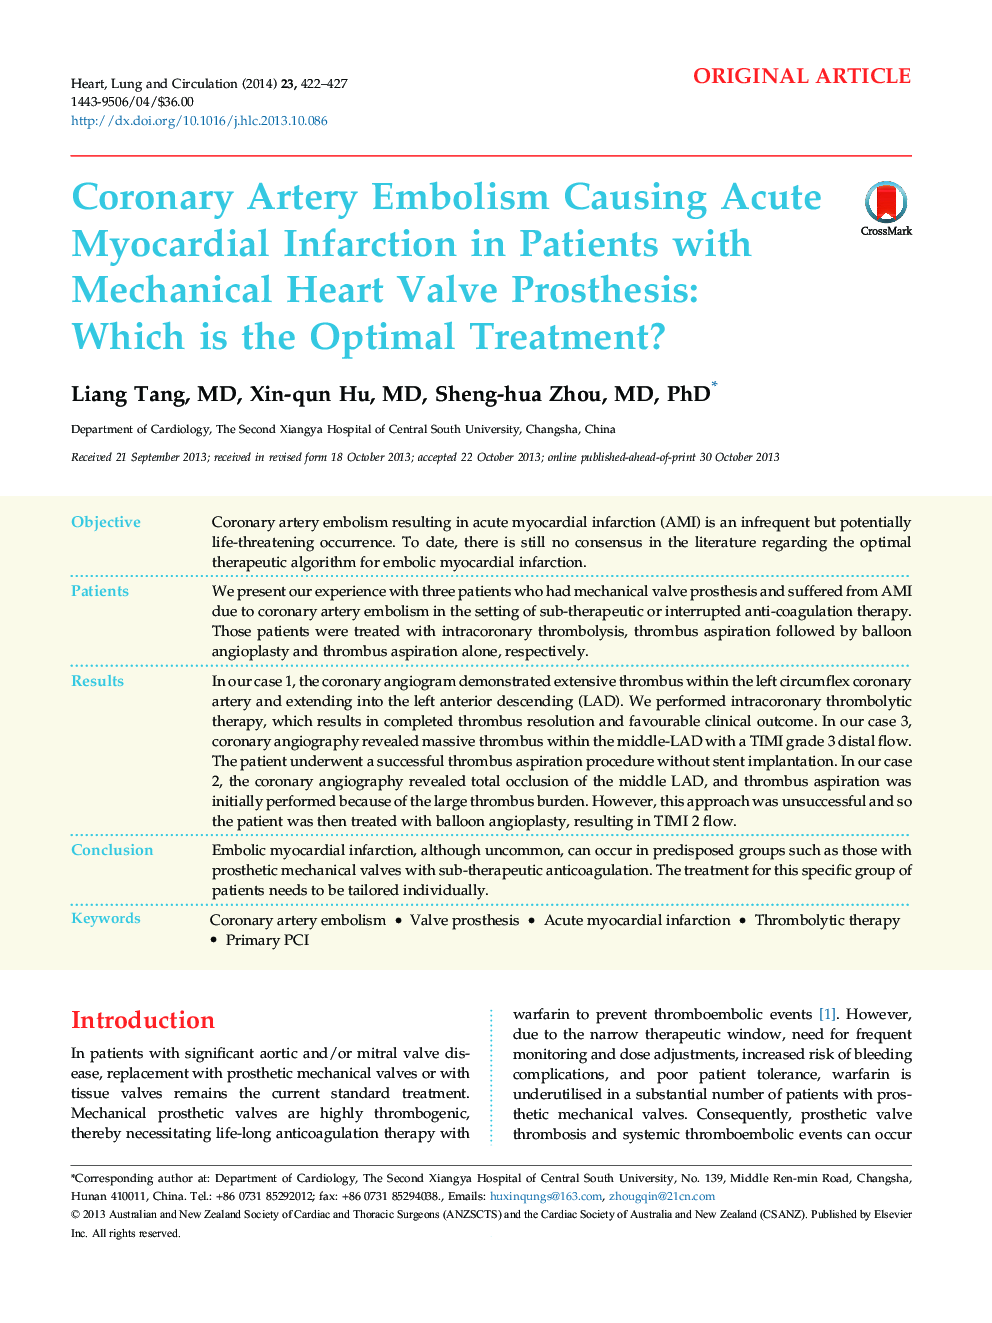 Coronary Artery Embolism Causing Acute Myocardial Infarction in Patients with Mechanical Heart Valve Prosthesis: Which is the Optimal Treatment?